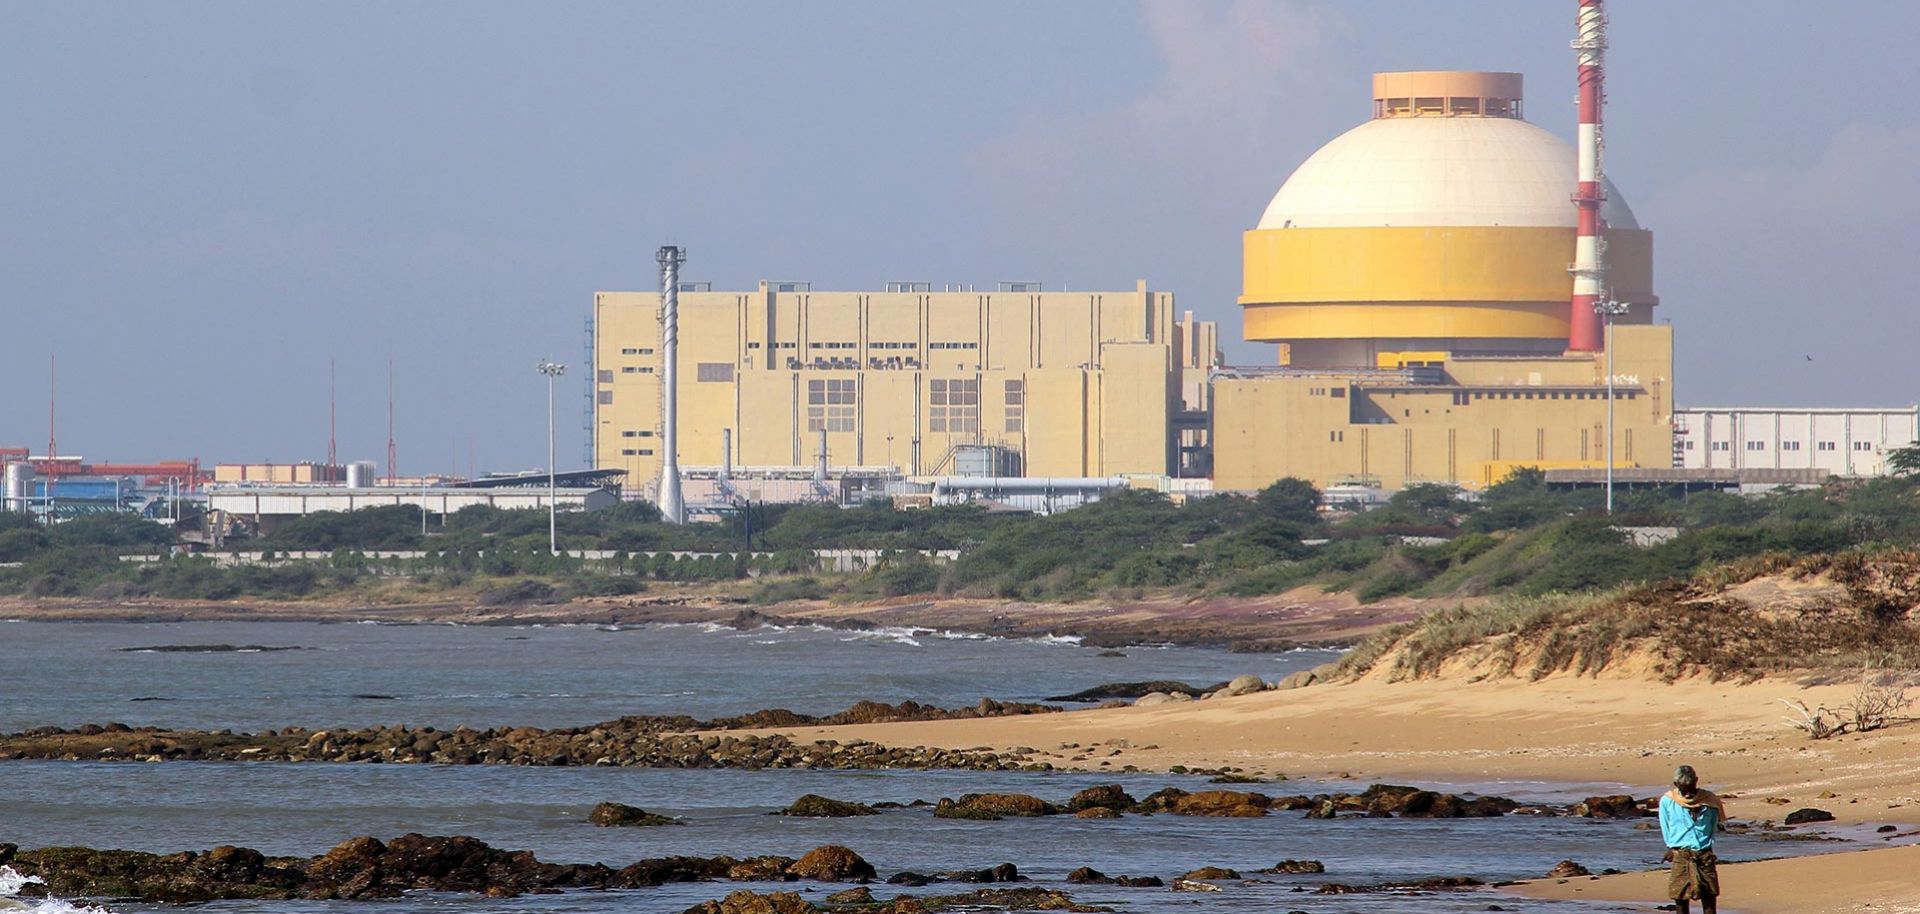 Russia's increasing involvement in India's nuclear power program includes Rosatom's building of two reactors at the Kudankulam Nuclear Power Plant.